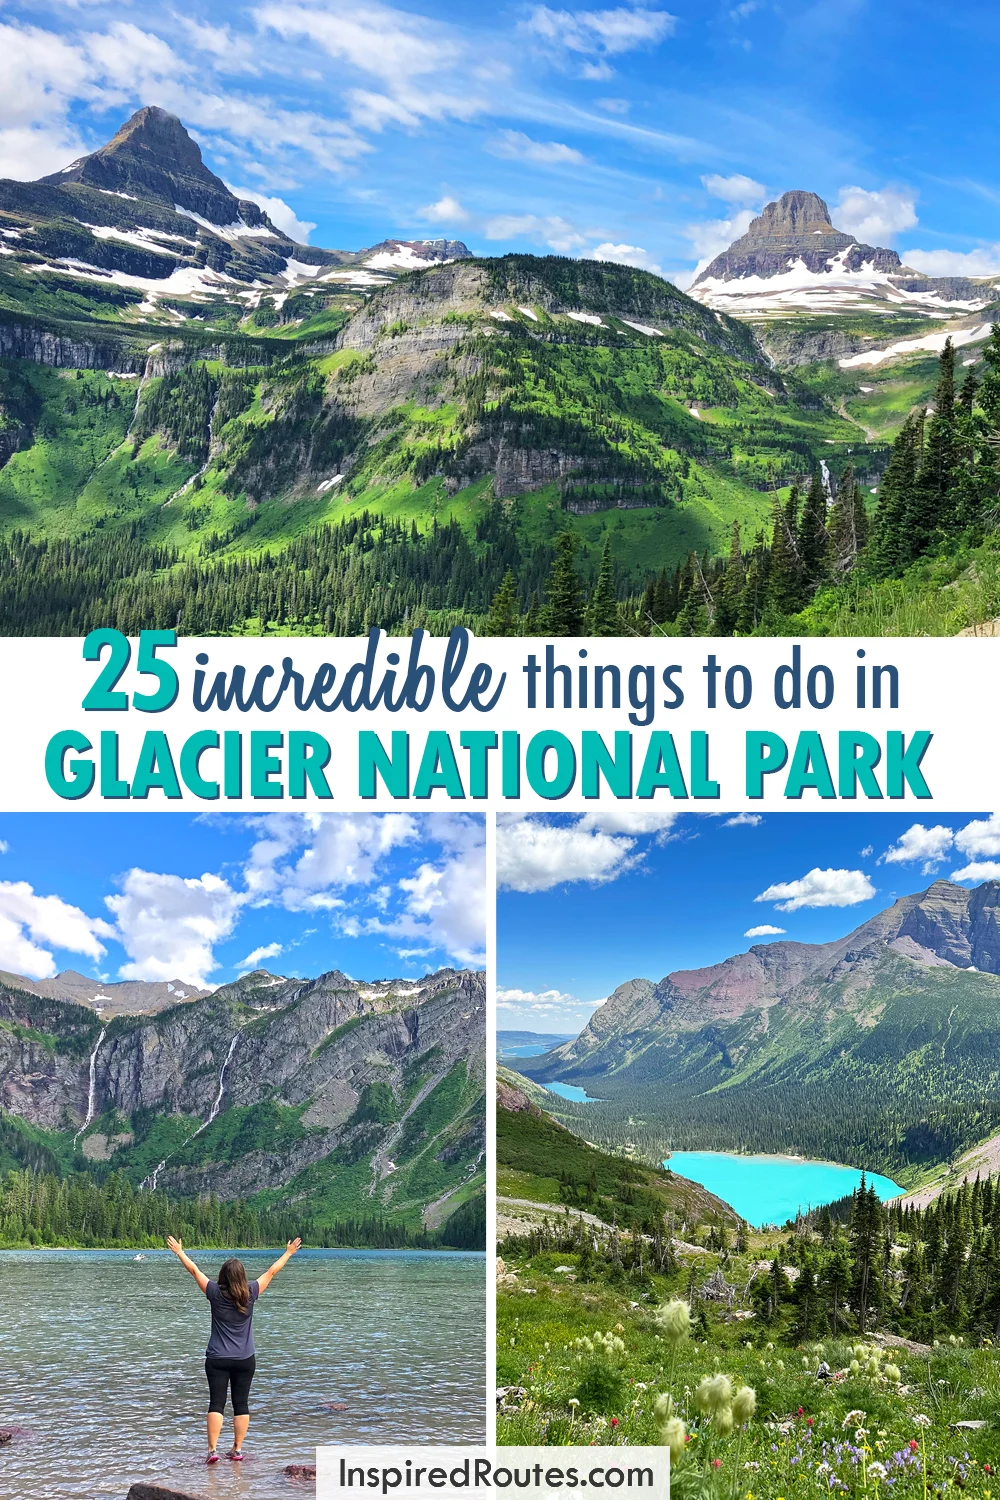 25 incredible things to do Glacier National Park with photos of mountains and woman standing at lake